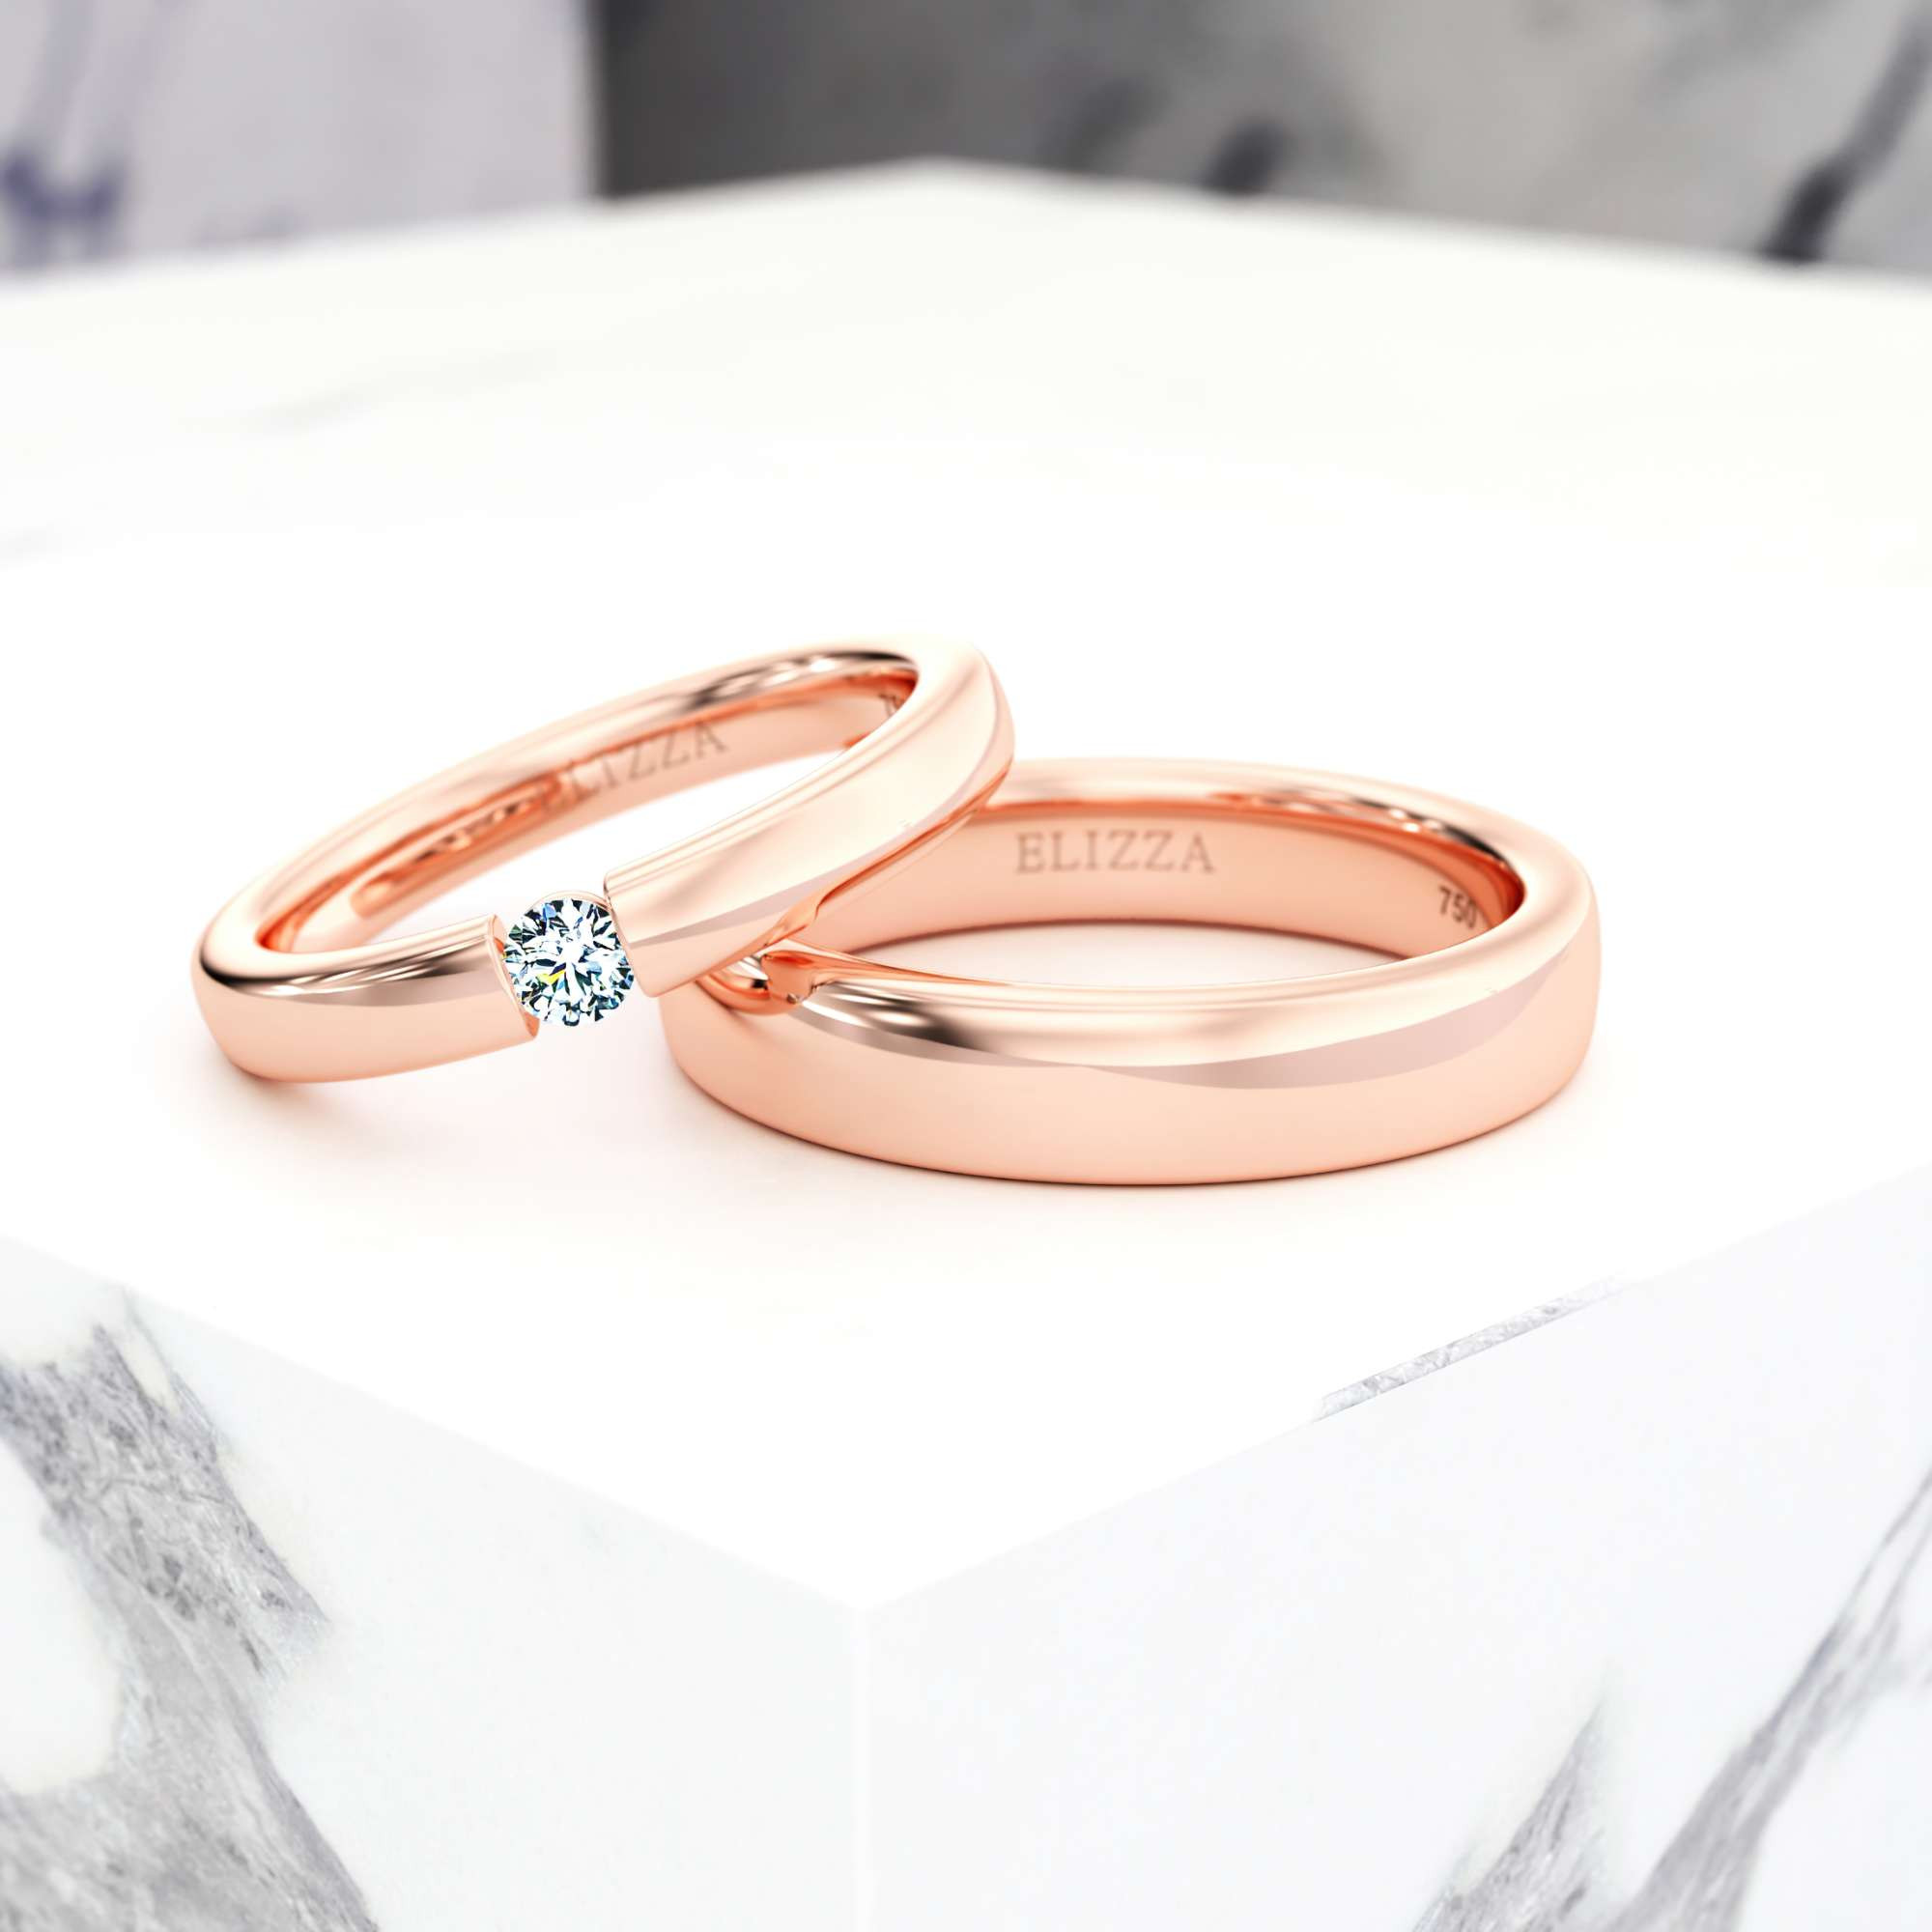 Trauring Eicca Couple | 14K Roségold 1